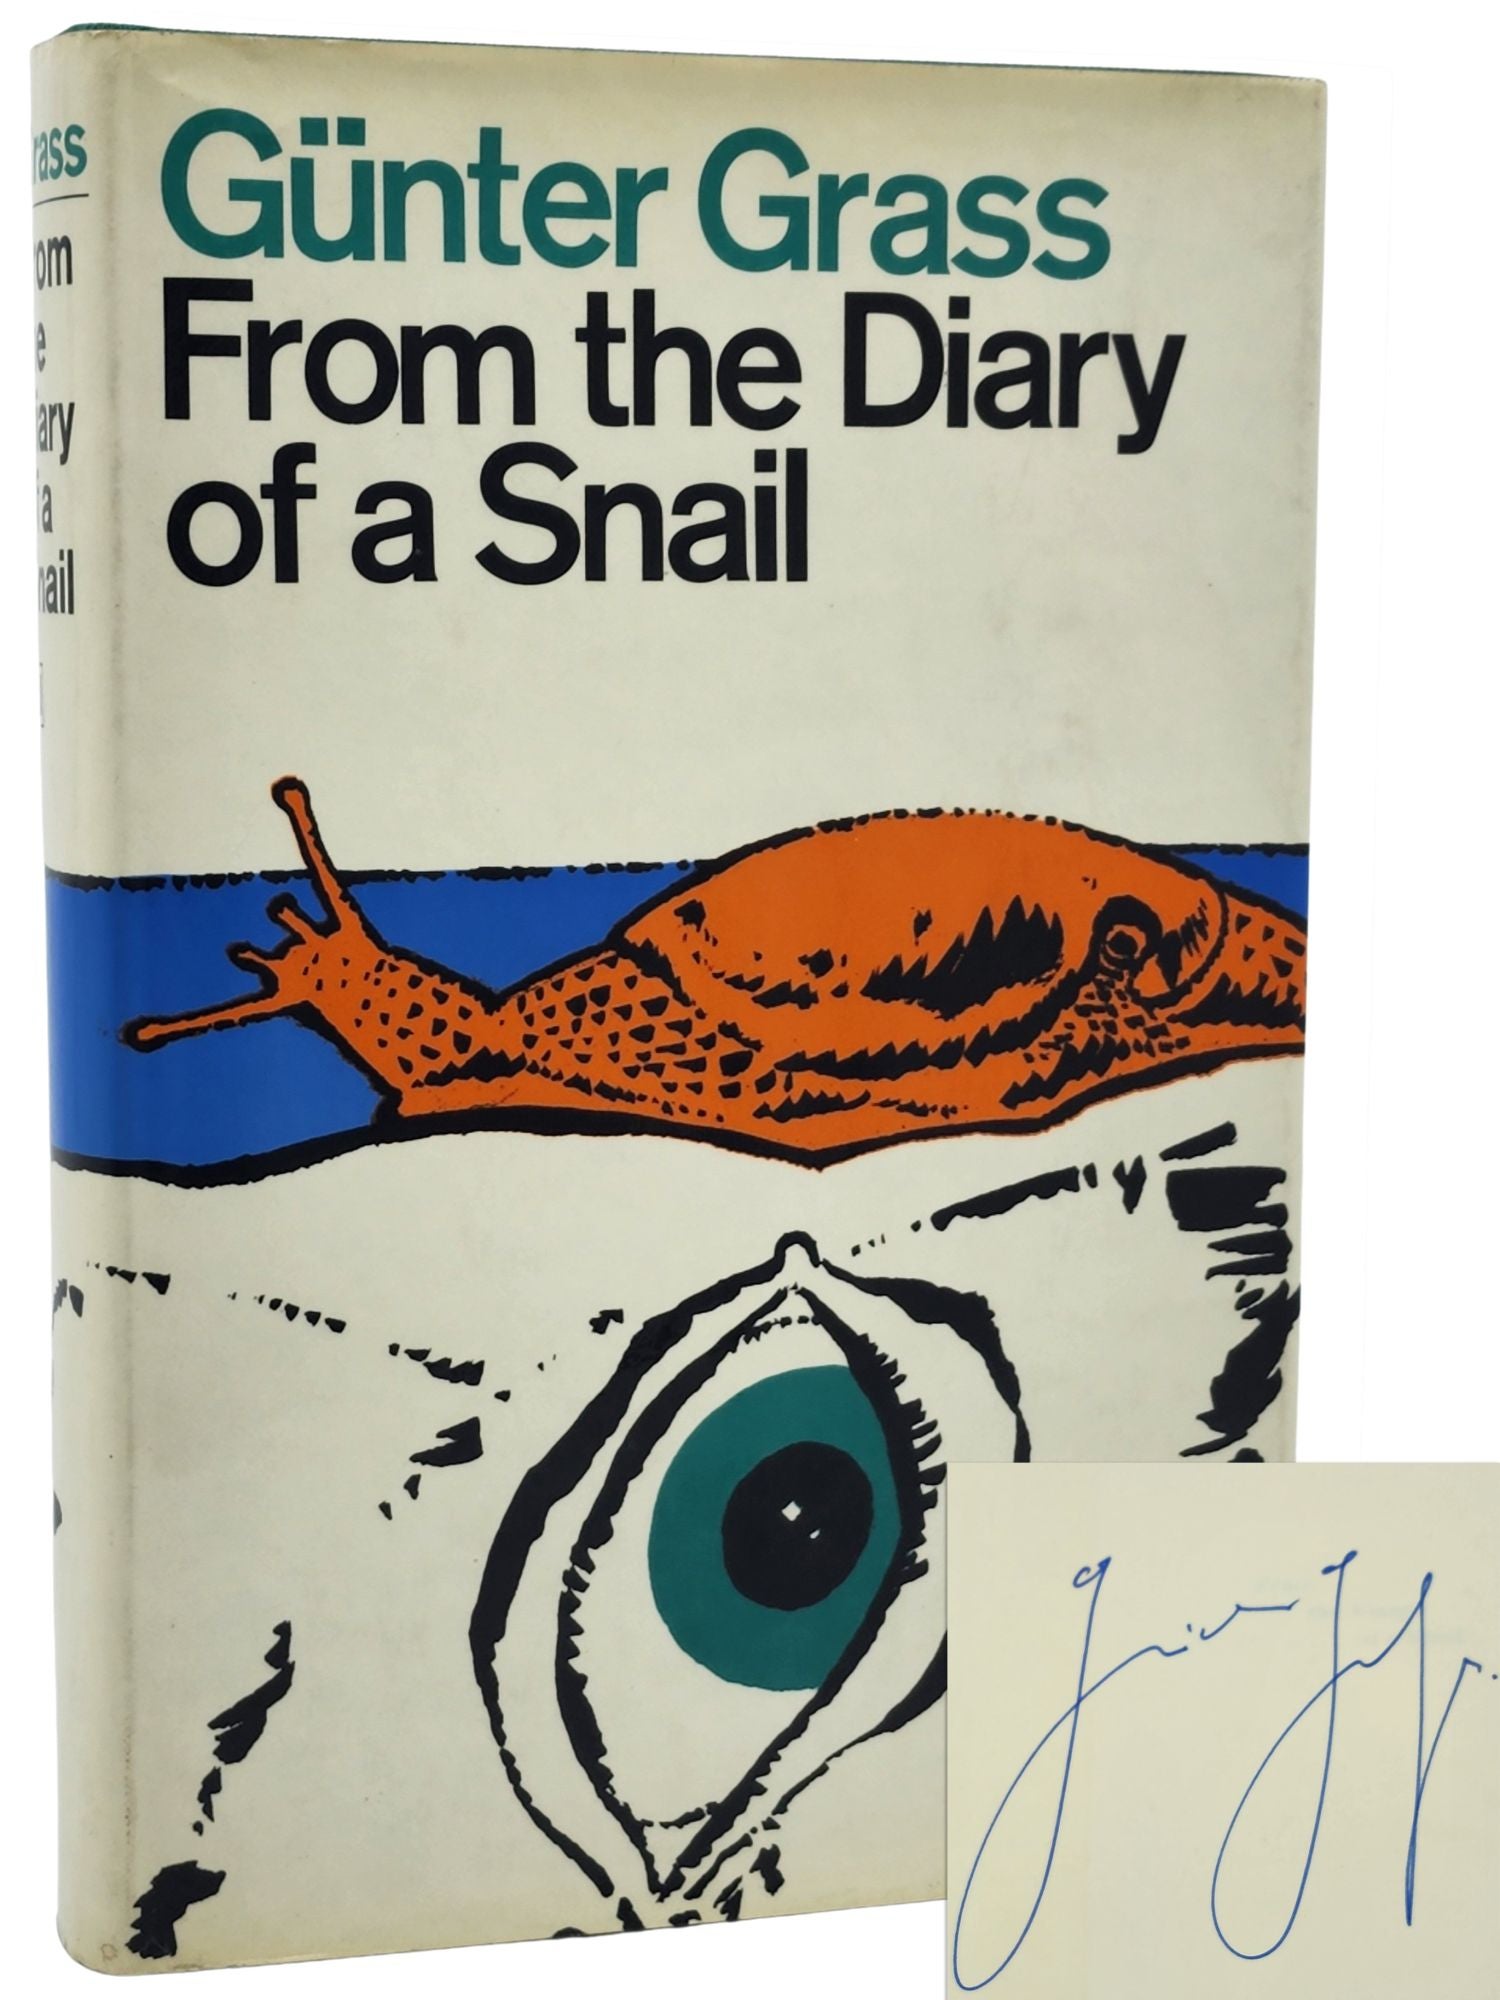 [Book #27621] FROM THE DIARY OF A SNAIL. Günter Grass.